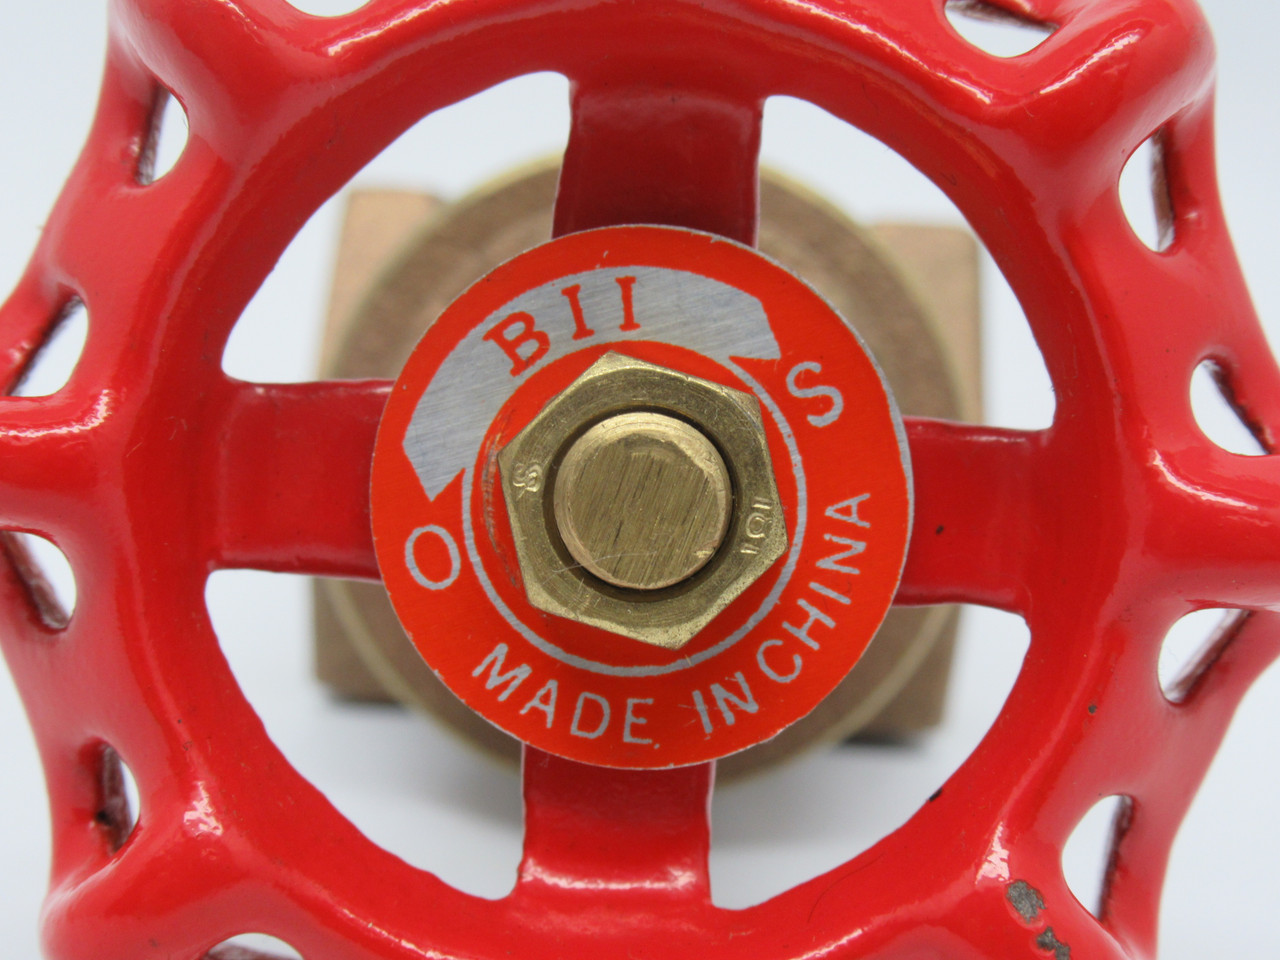 Boshart Industries 0818-12 Brass Gate Valve 1-1/4"FPT 200PSI Red Handle USED